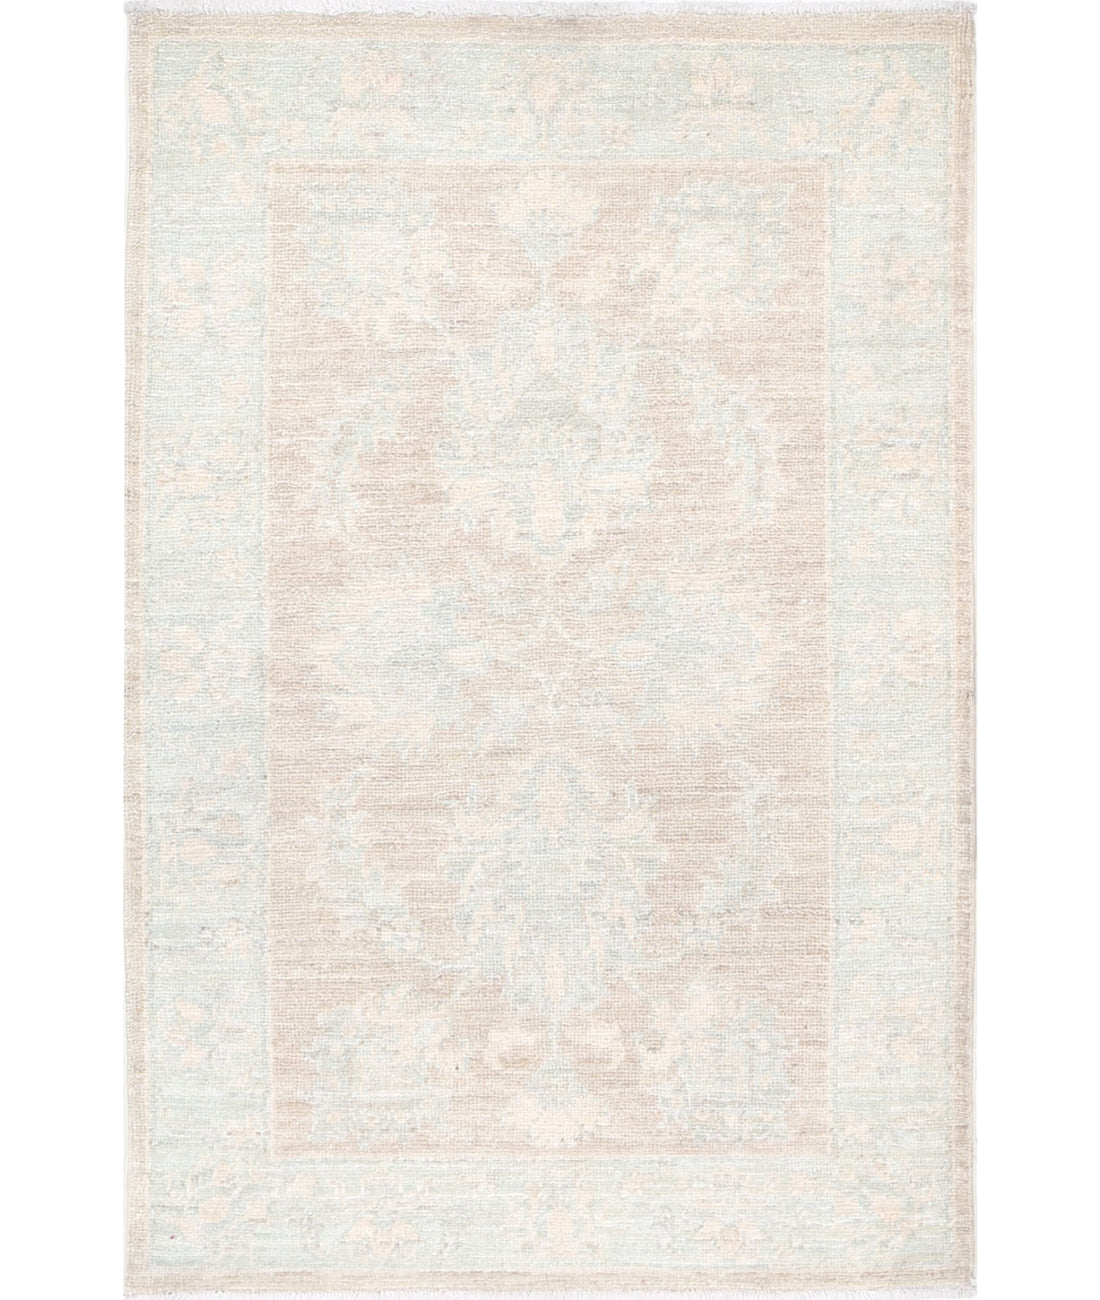 Hand Knotted Serenity Wool Rug - 2'1'' x 3'2'' 2'1'' x 3'2'' (63 X 95) / Brown / Blue